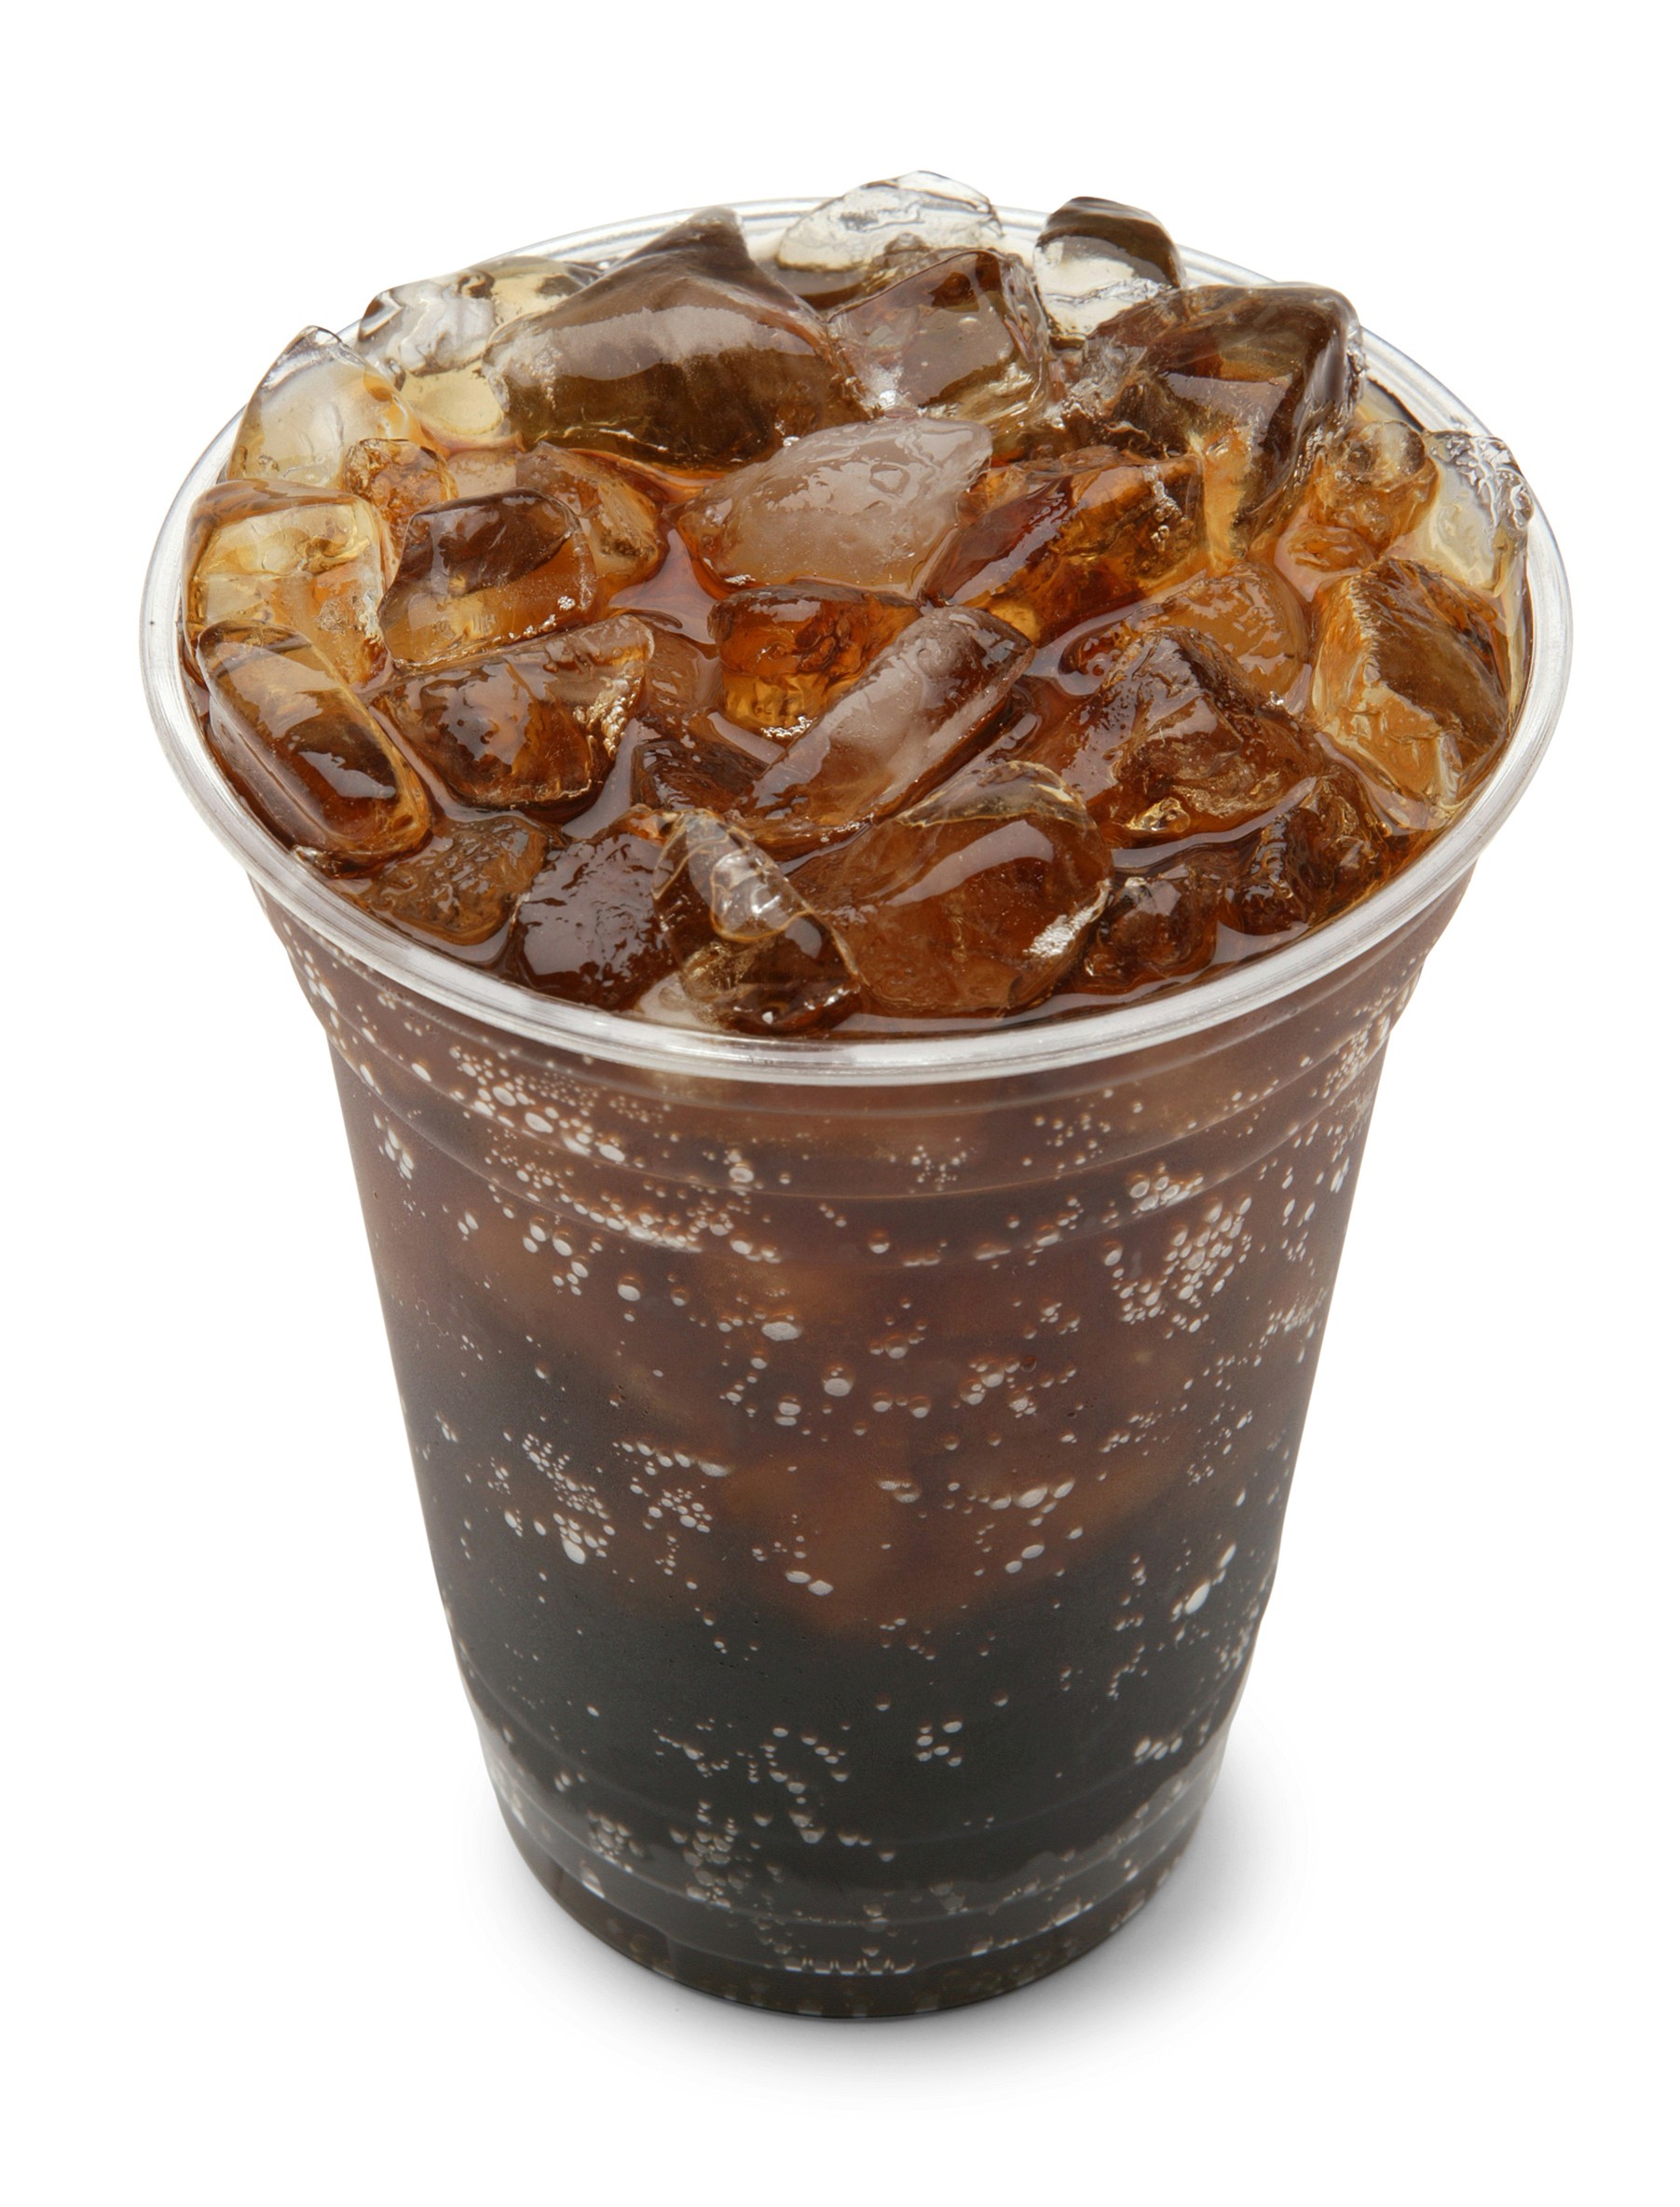 iStock
Diet soda pop may lead to more belly fat.